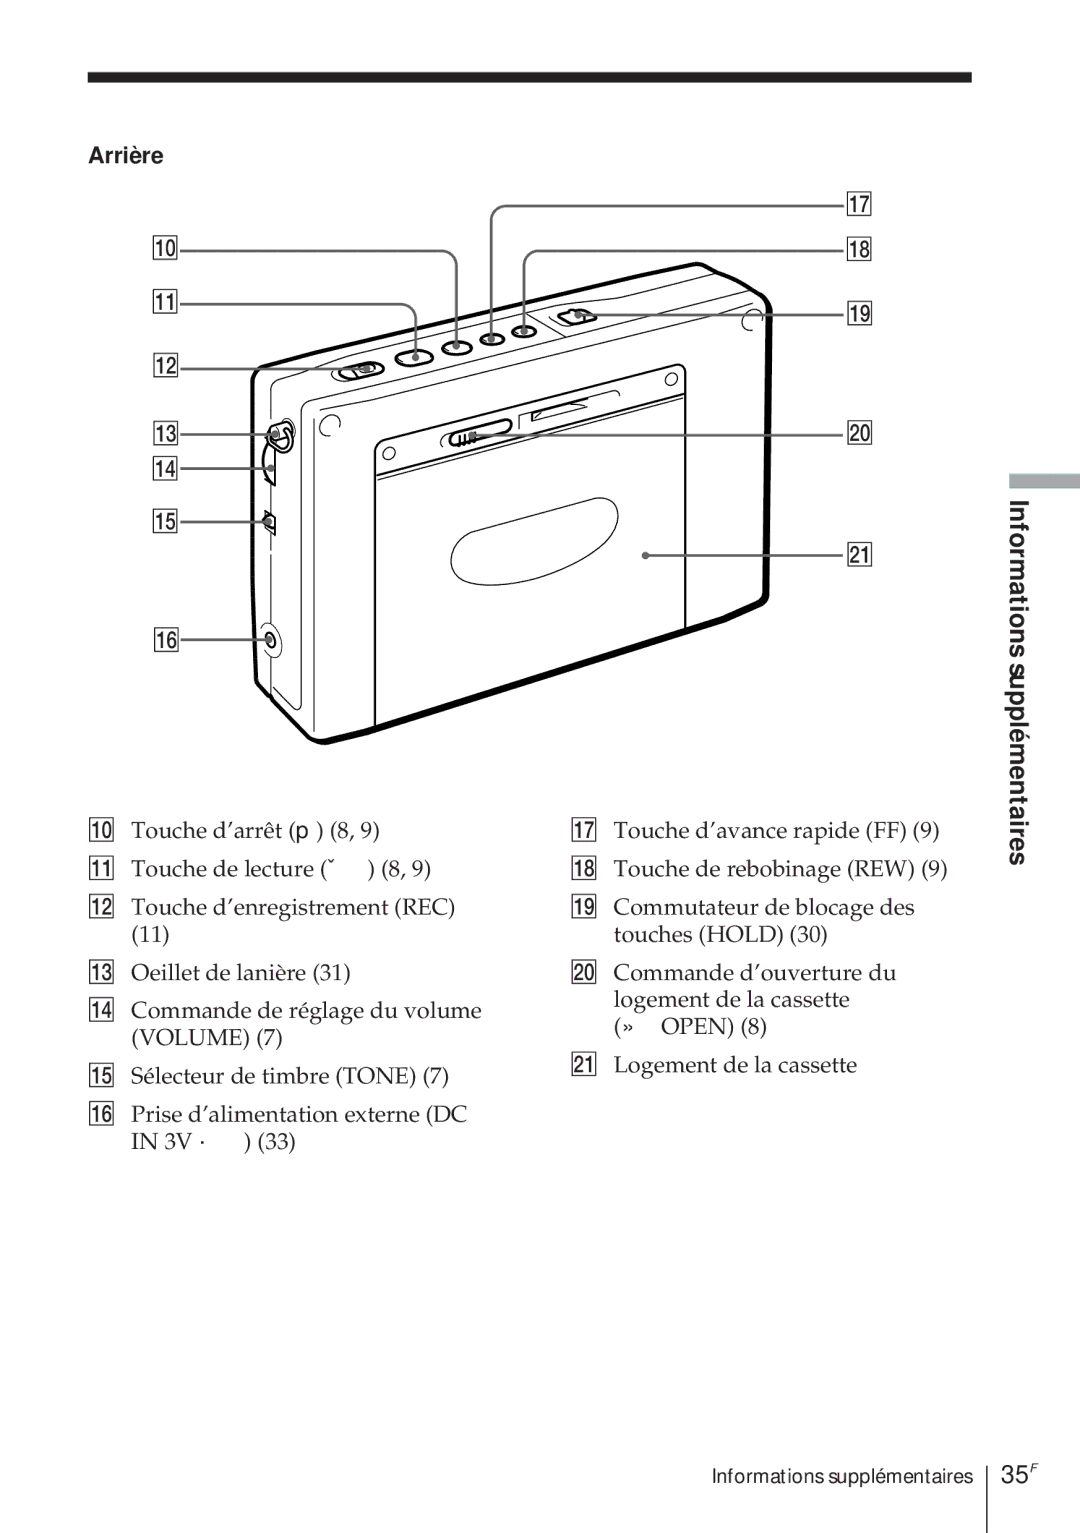 Sony ICF-SW1000TS operating instructions 35F, Arrière 